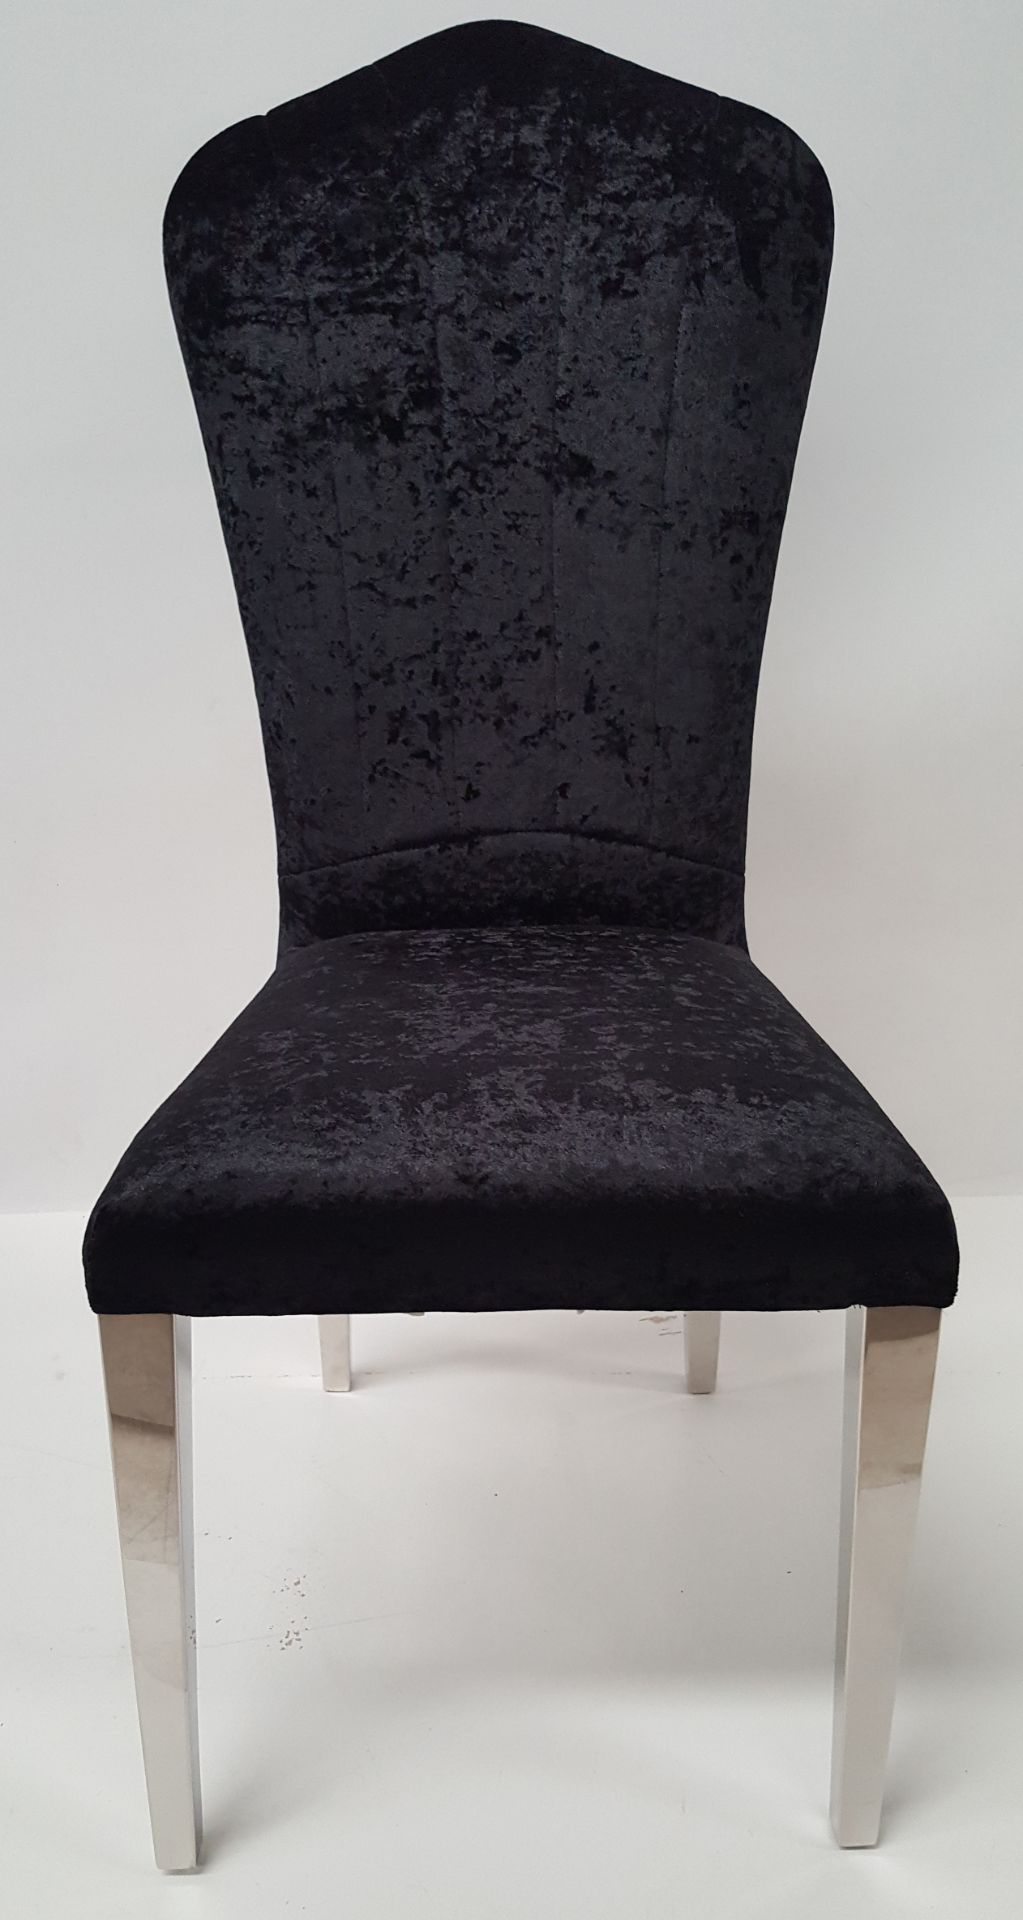 6 x STYLISH BLACK CRUSHED VELVET DINING TABLE CHAIRS - CL408 - Location: Altrincham WA14 - Image 3 of 6